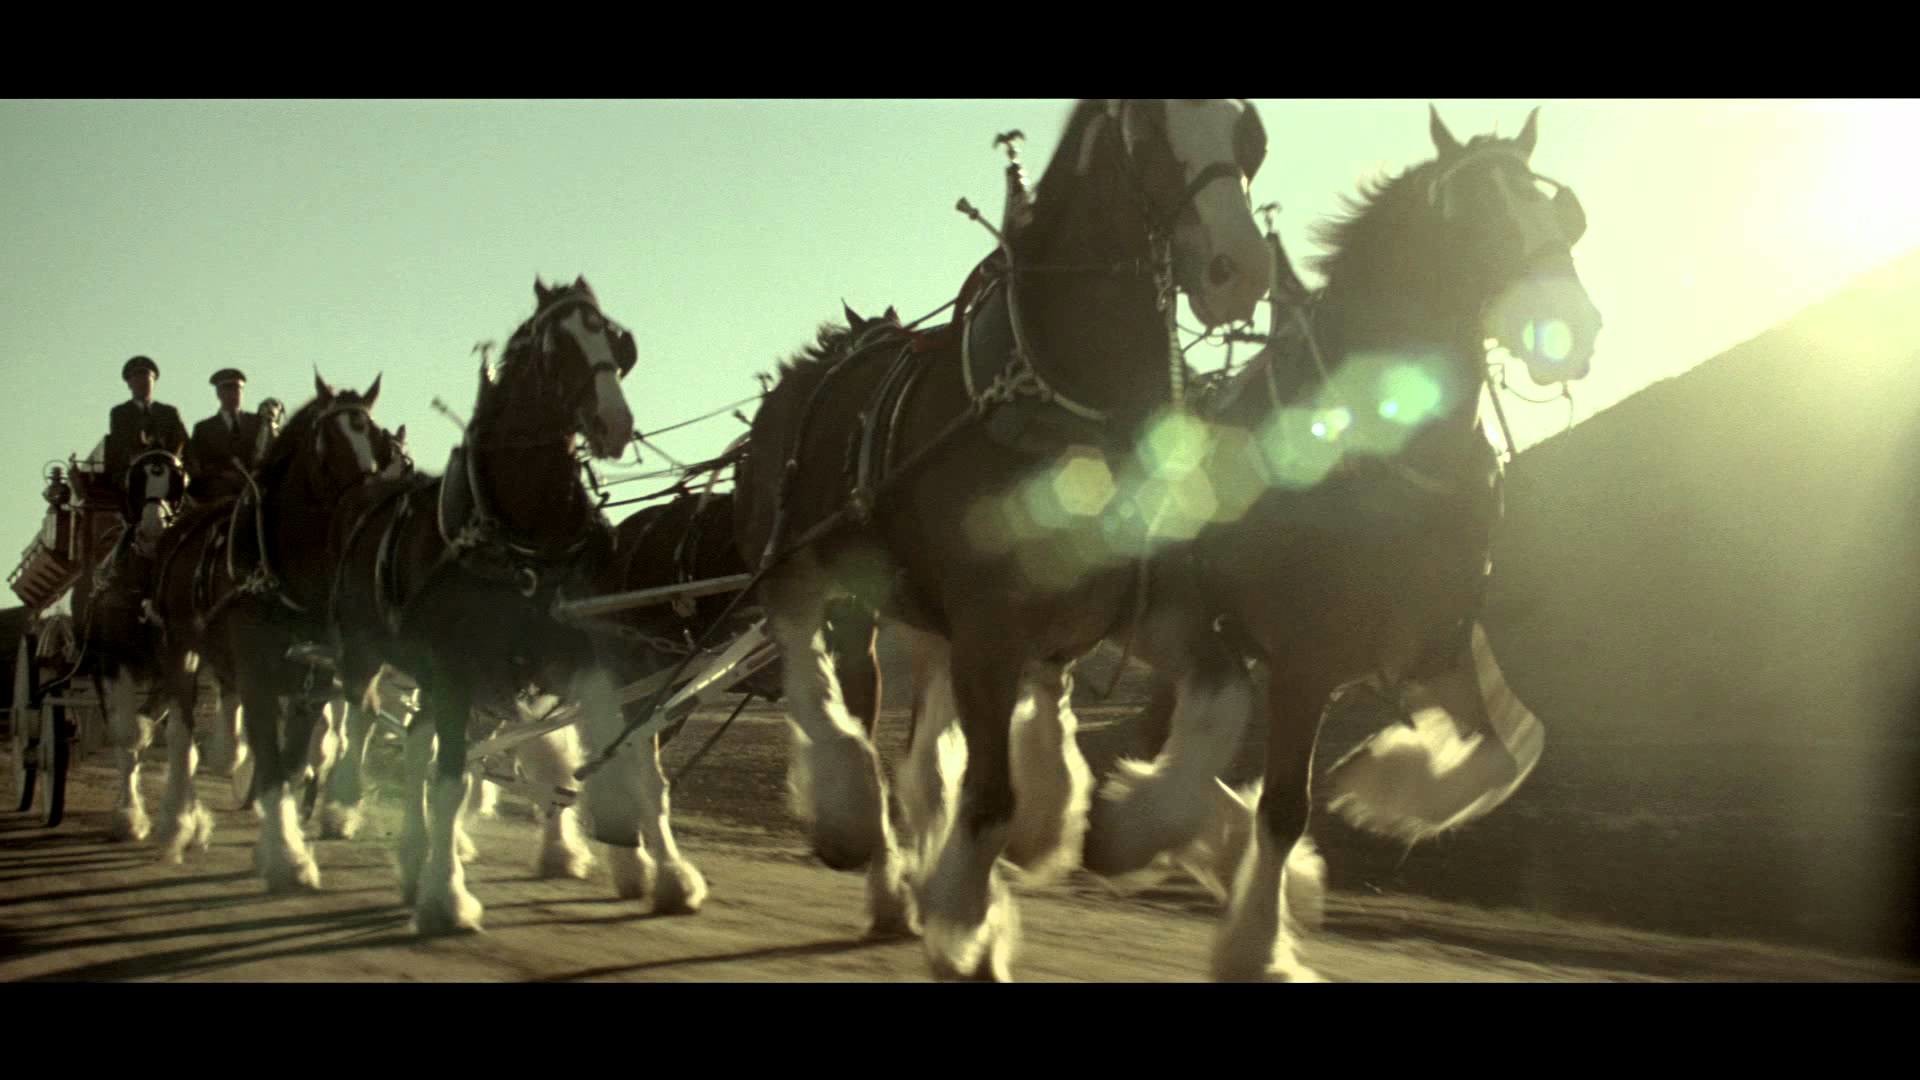 1920x1080 Budweiser Super Bowl 2012 Ad Return of the King Clydesdales Teaser - YouTube